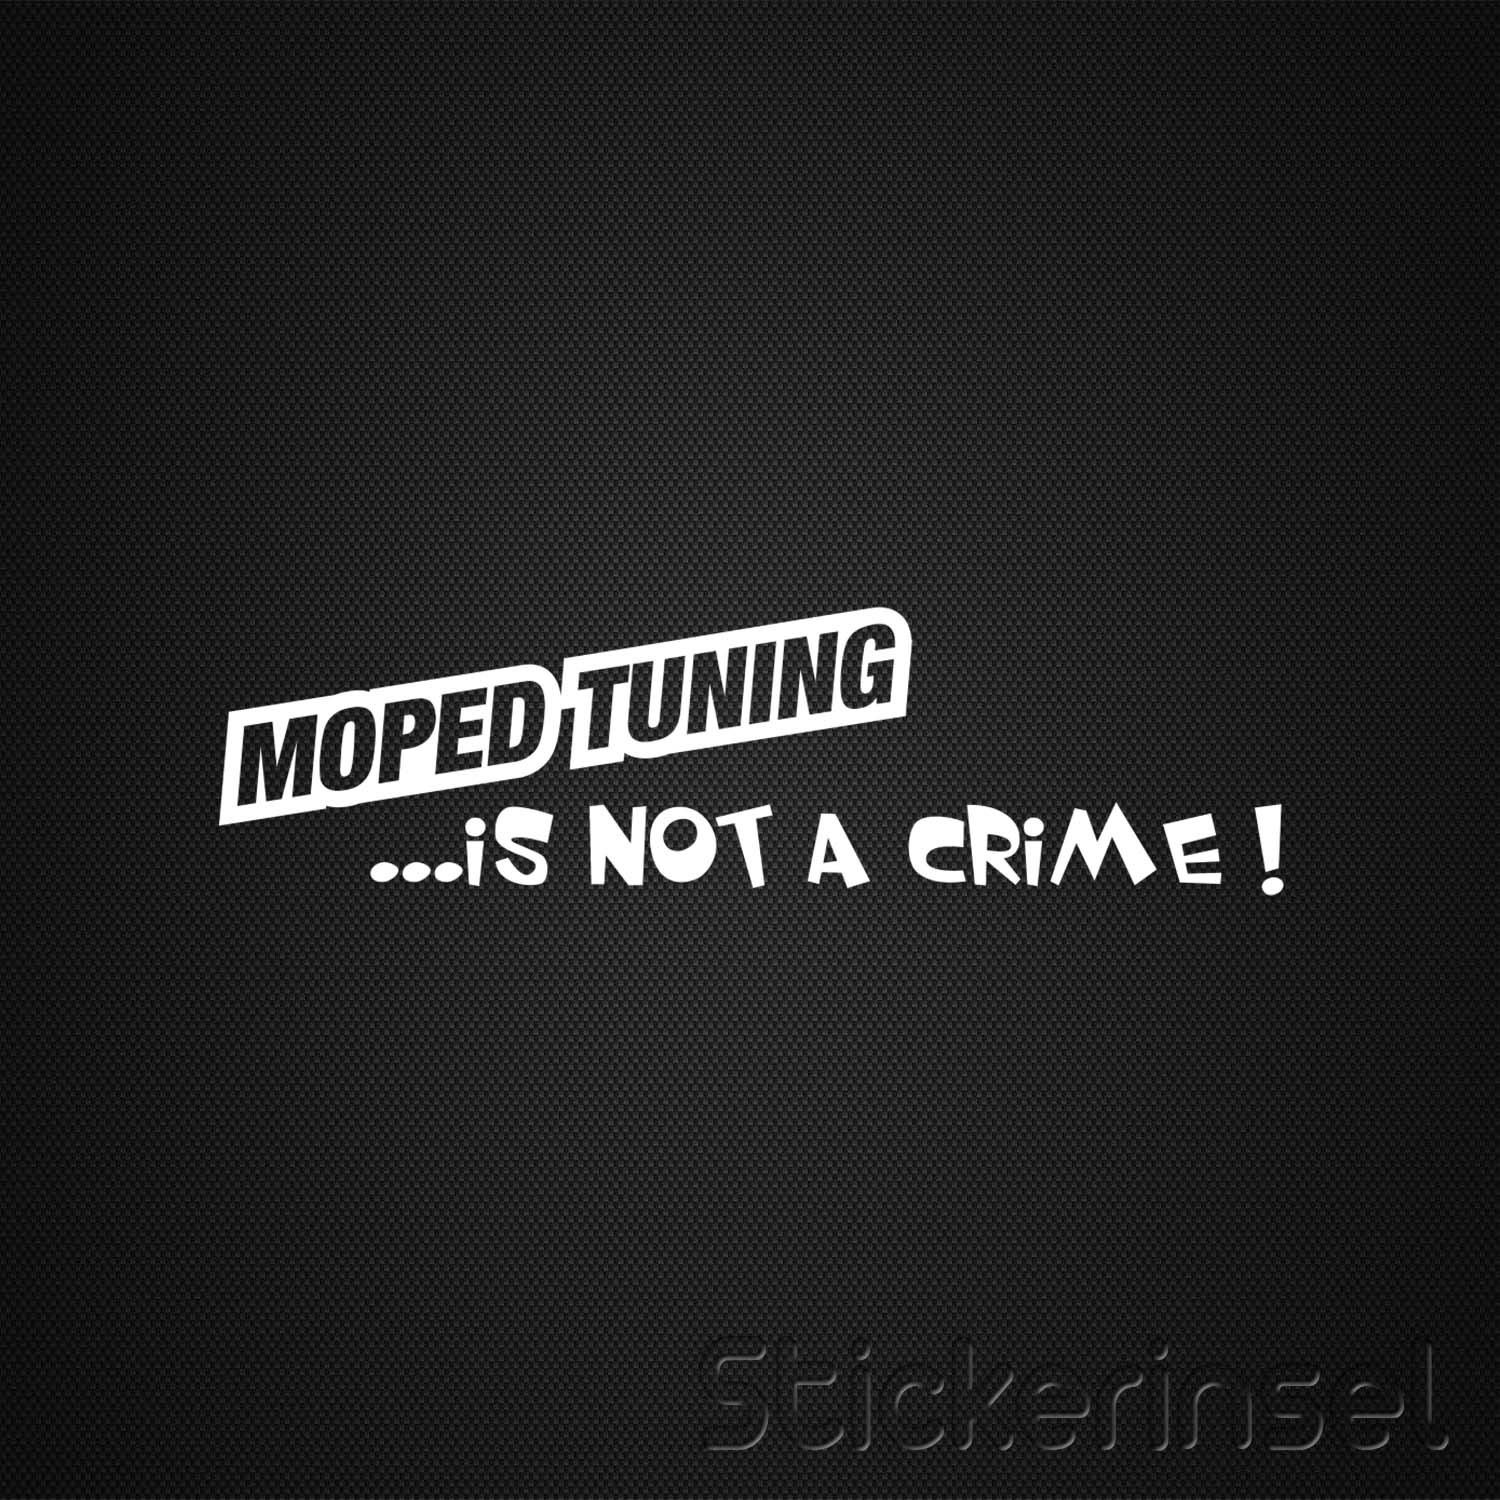 https://www.stickerinsel.at/wp-content/uploads/2016/04/Stickerinsel_Autoaufkleber_Moped-Tuning-is-not-a-Crime.jpg